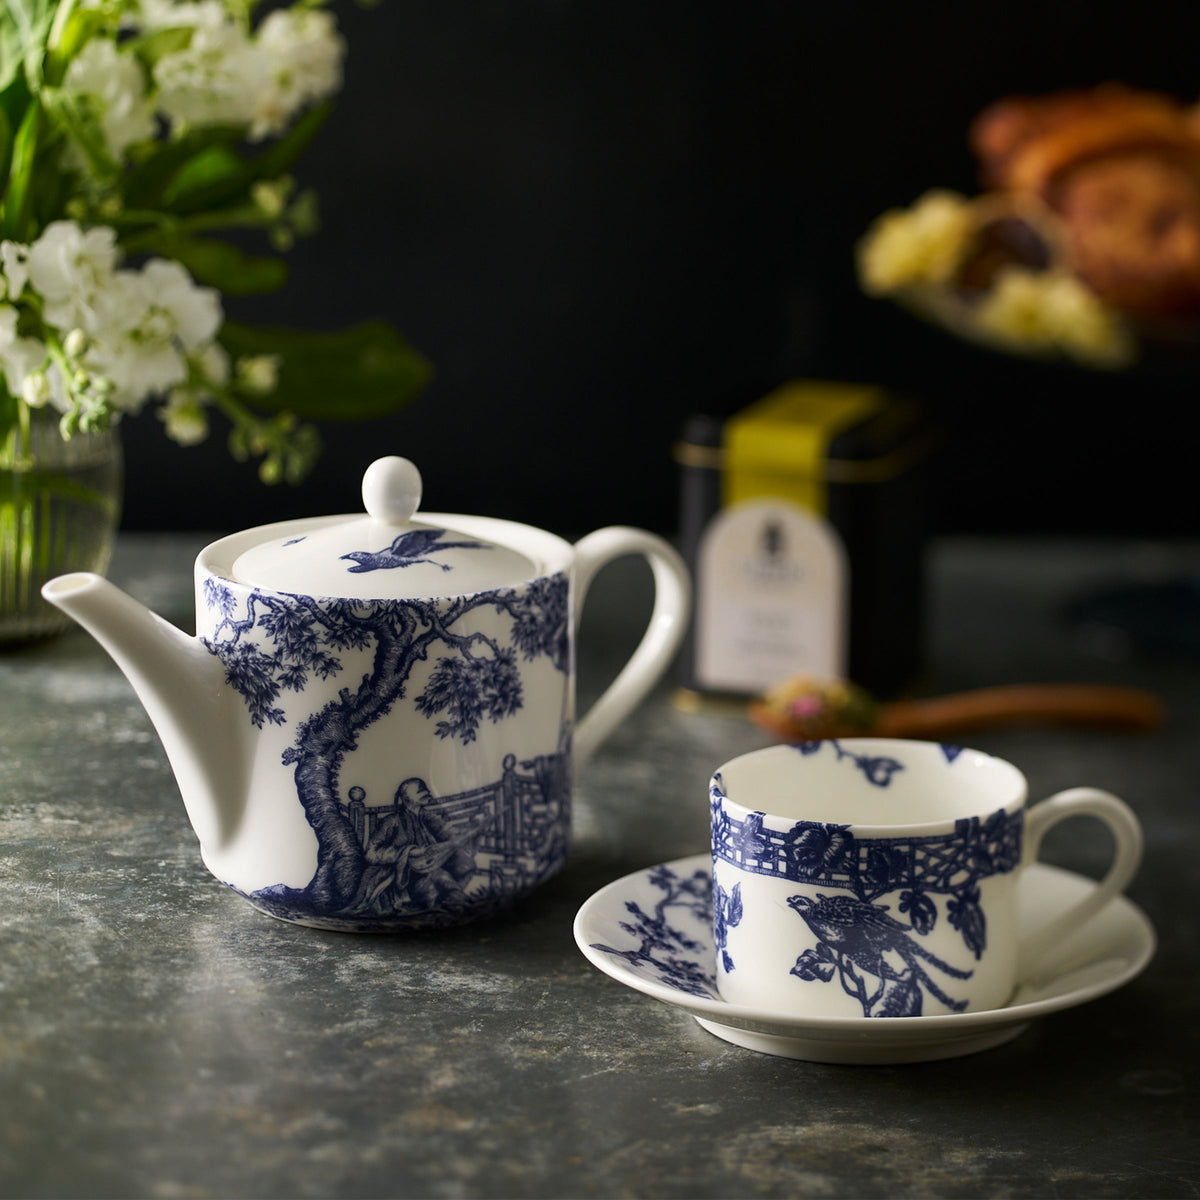 A stunning Chinoiserie Toile blue and white porcelain teapot and **Caskata Artisanal Home Chinoiserie Toile Cups &amp; Saucers, Set of 2** adorned with tree and bird designs are on a stone countertop. They are beside a bouquet of flowers, a tin of tea, and a plate of pastries in the background.